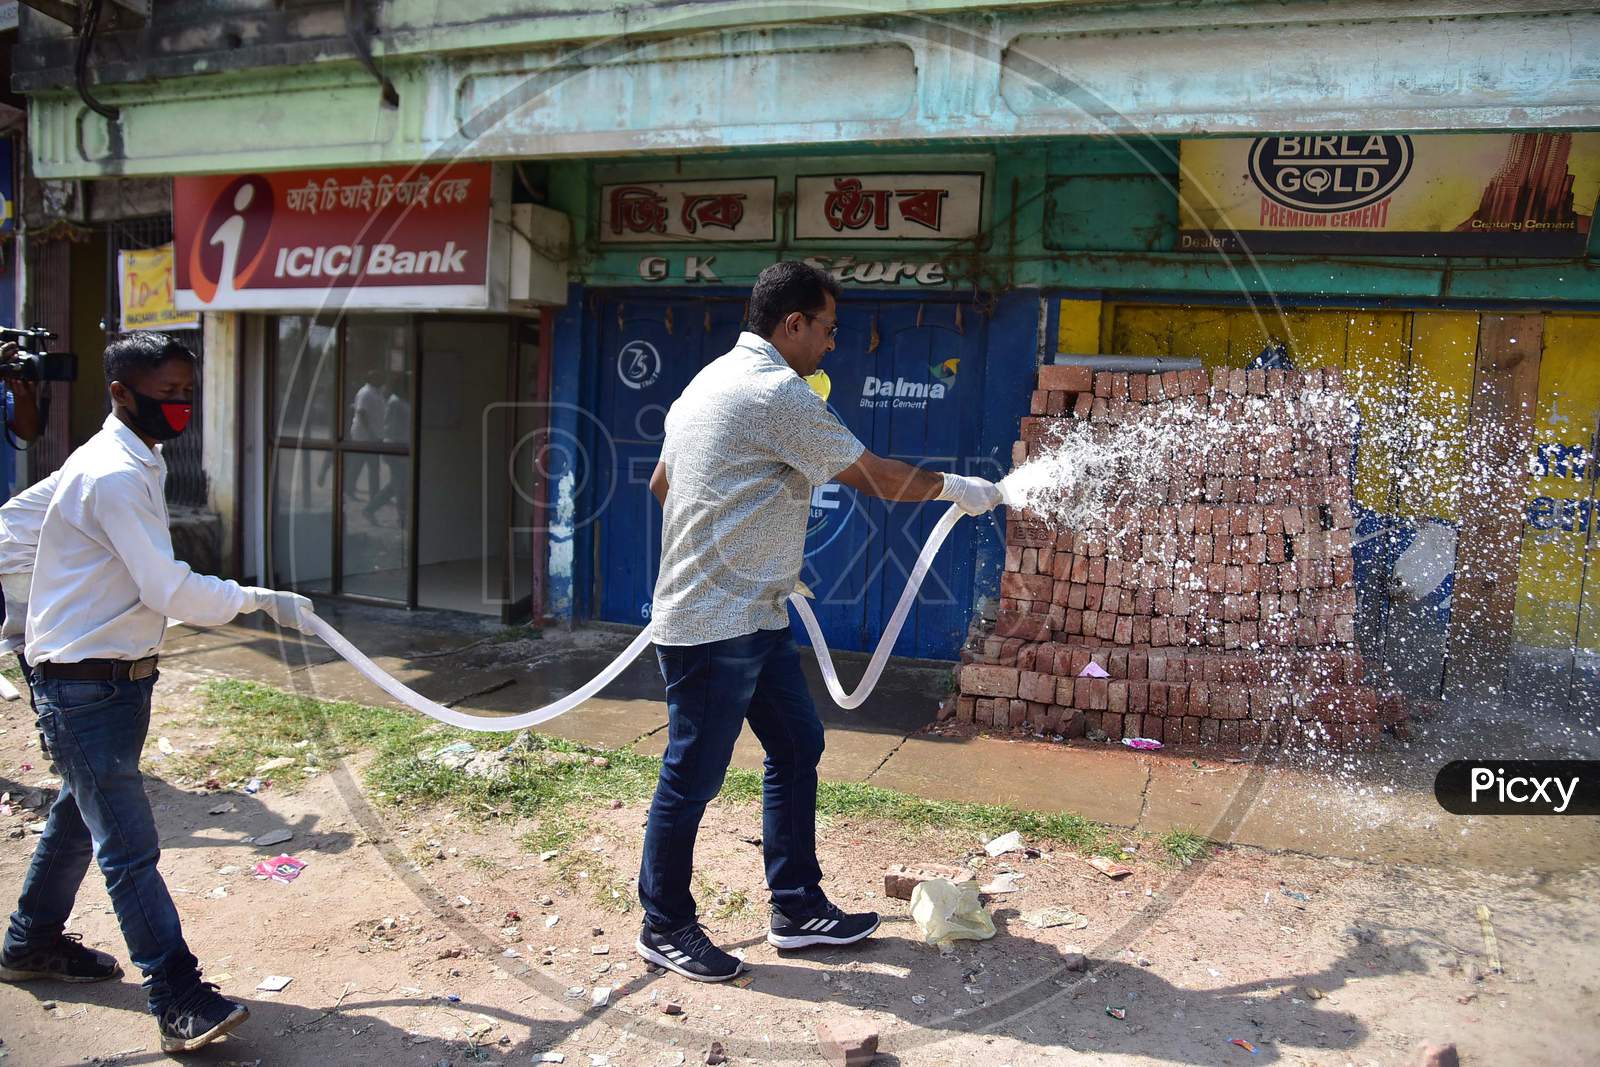 Nagaon  Nagaon Mla Rupak Sarmah Sprays Disinfectant On A Street To Contain The Spread Of Coronavirus During The Nationwide Lockdown In Nagaon District Of Assam On April 03,2020.